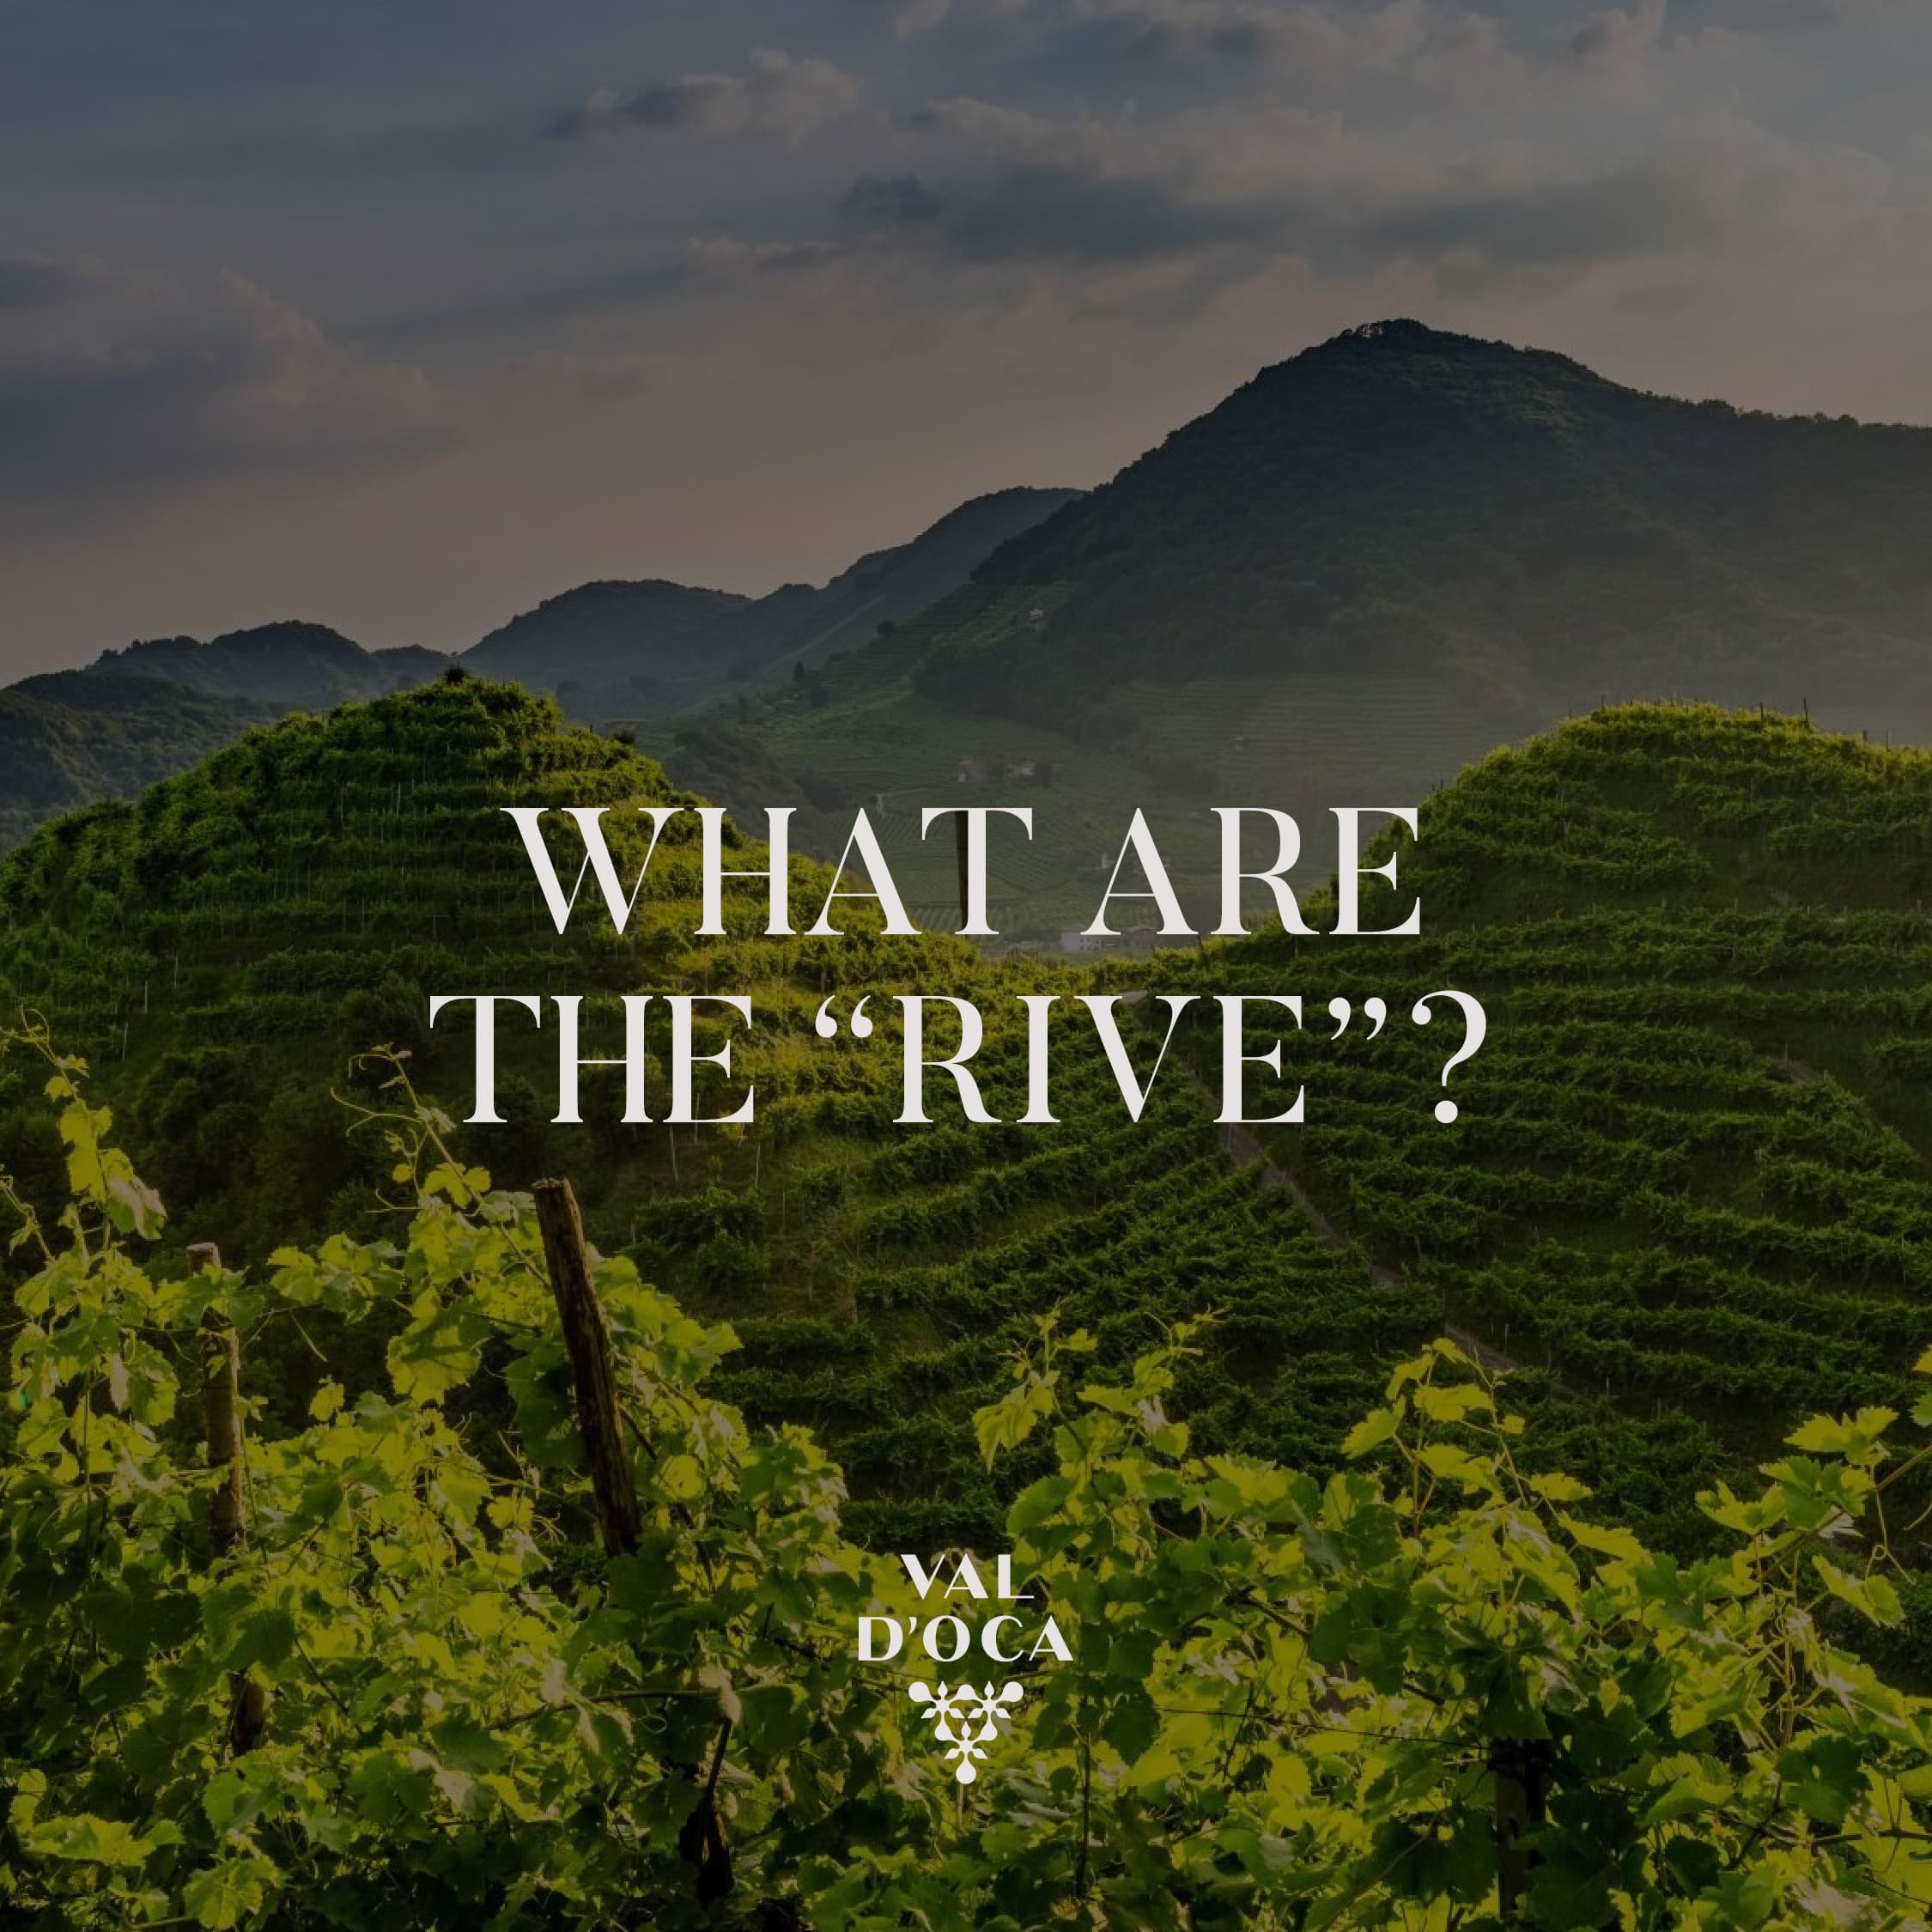 Val d'Oca: The Art of Prosecco in the Heart of DOCG